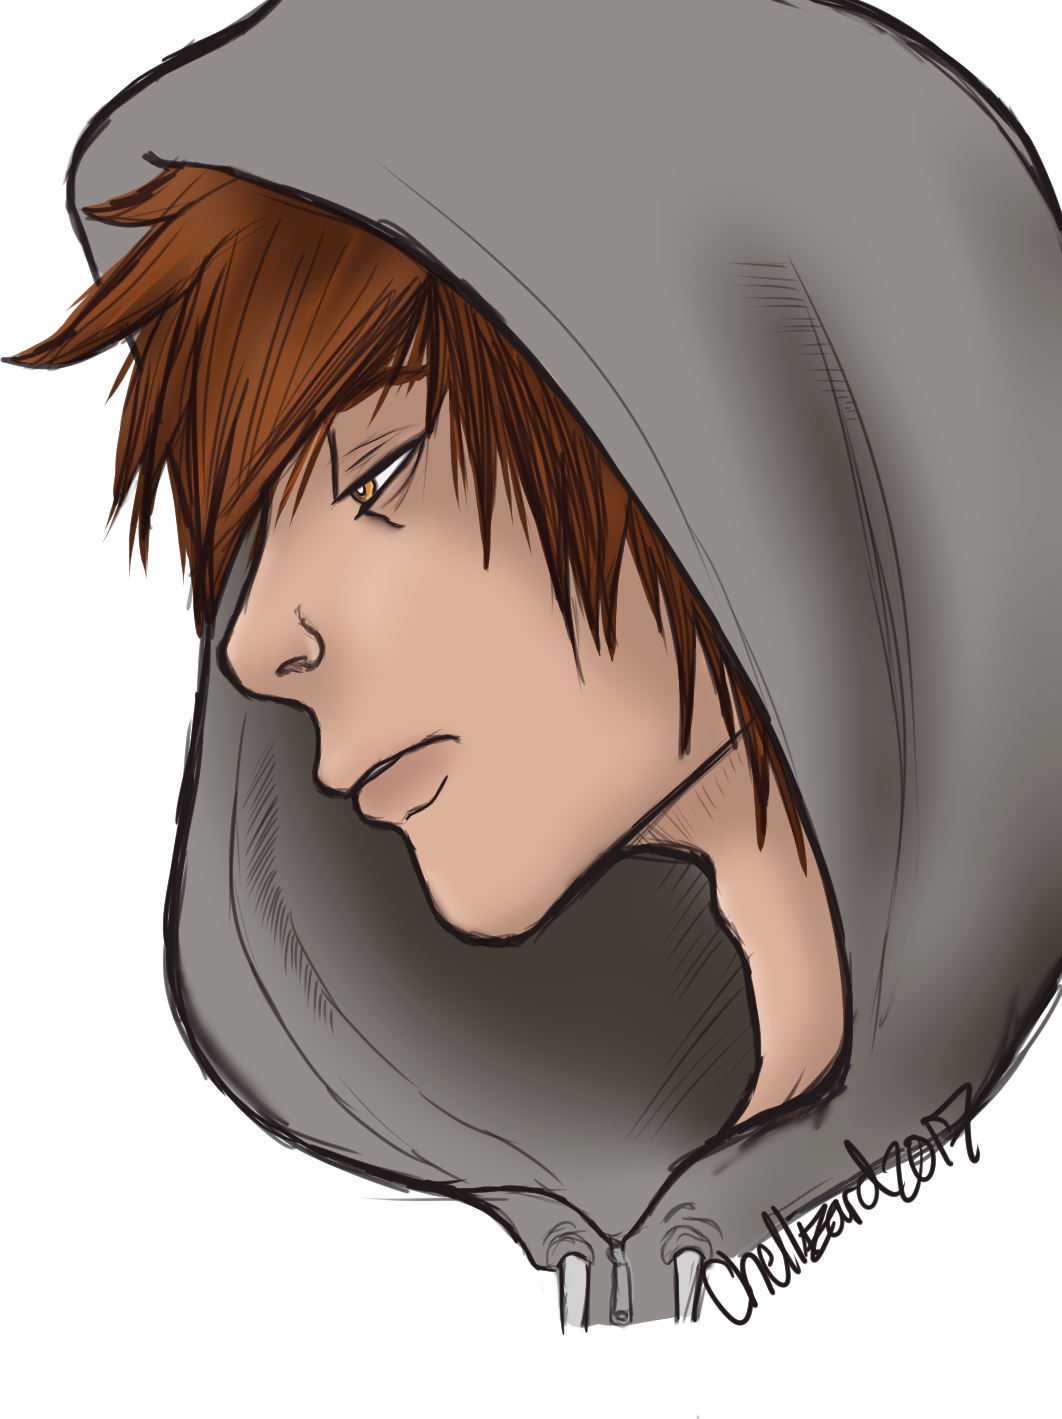 Looking for characters to doodle in my free time for studies. Shoot_me_down_by_chellizarddraws-dbq07ya